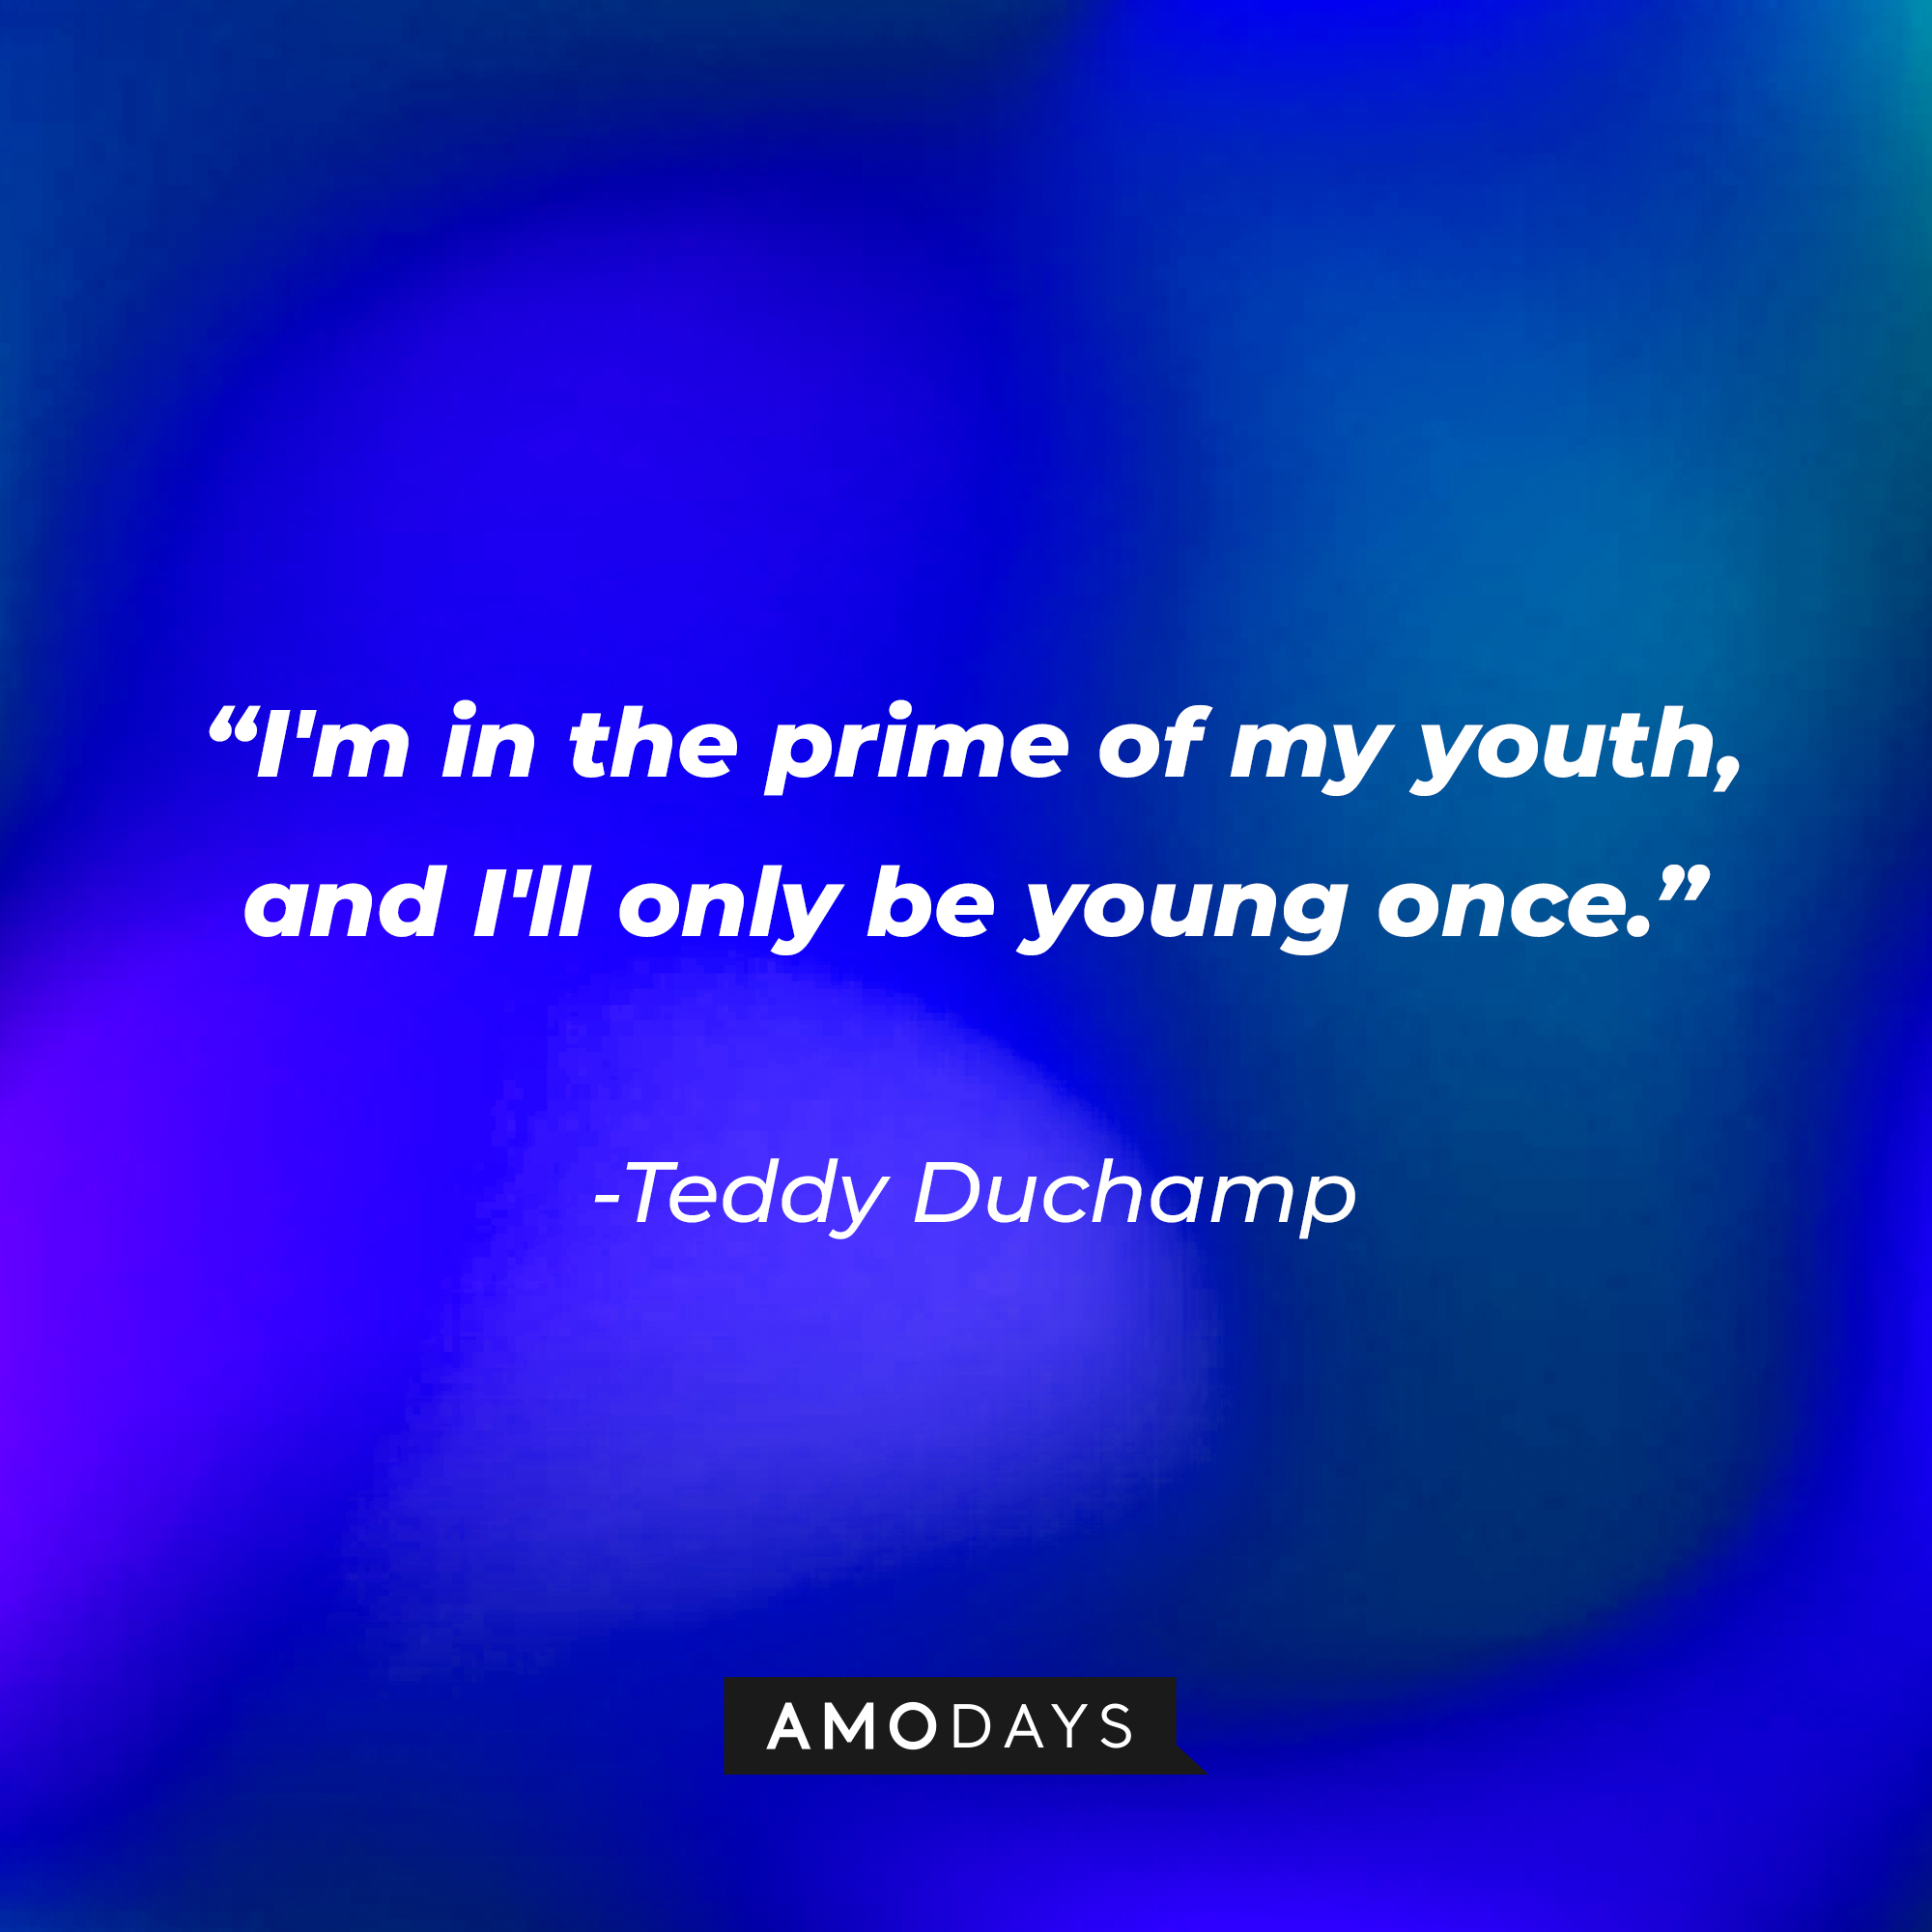 Teddy Duchamp’s quote: “I am acting my age. I'm in the prime of my youth, and I'll only be young once.” | Source: AmoDays